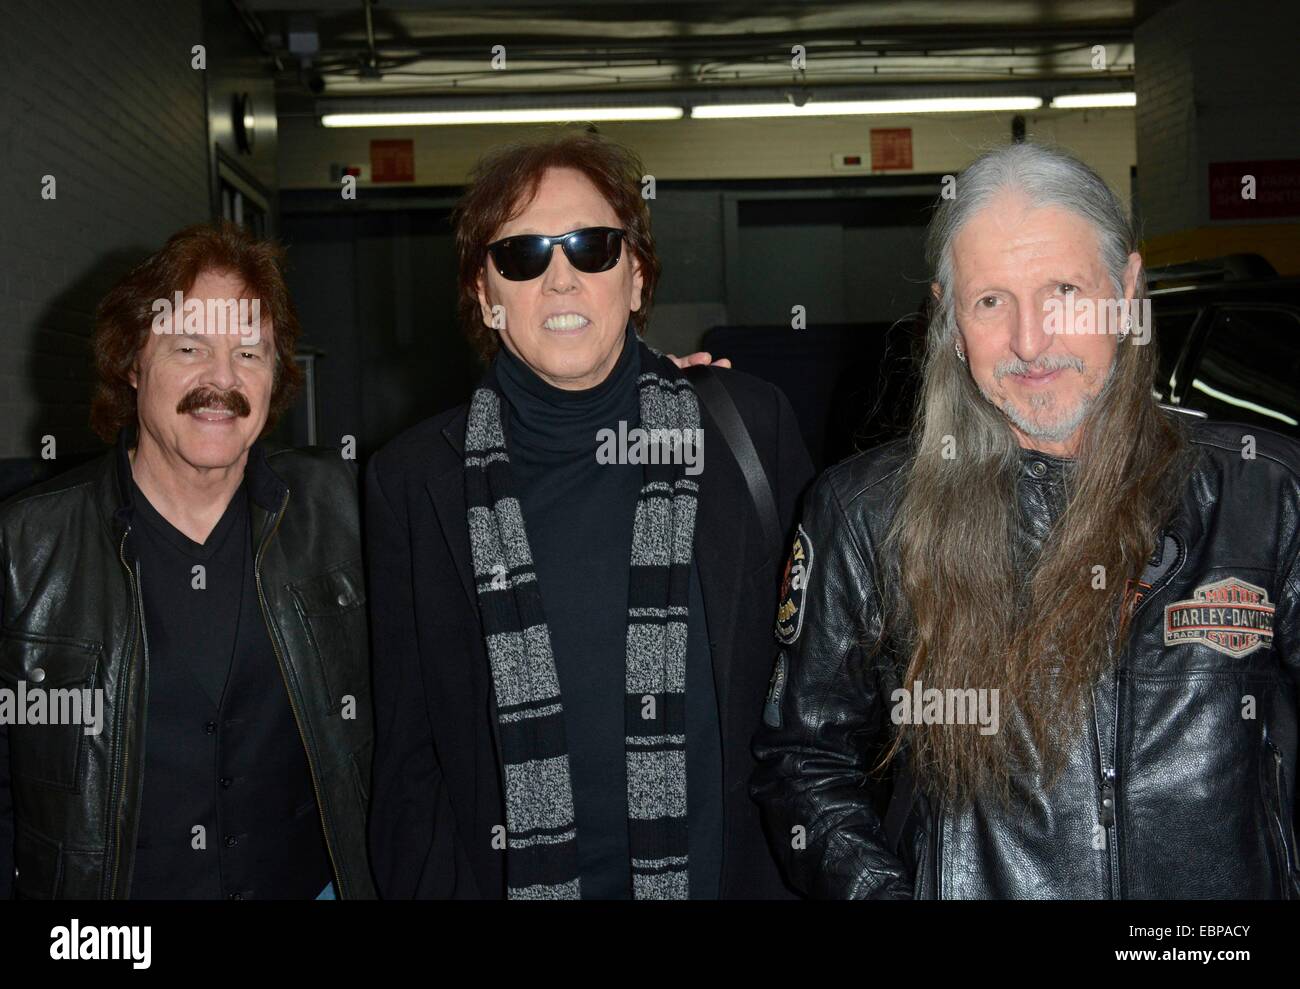 New York, NY, USA. 3rd Dec, 2014. Doobie Brothers: Tom Johnston, John McFee, Patrick Simmons out and about for Celebrity Candids - WED, New York, NY December 3, 2014. Credit:  Derek Storm/Everett Collection/Alamy Live News Stock Photo